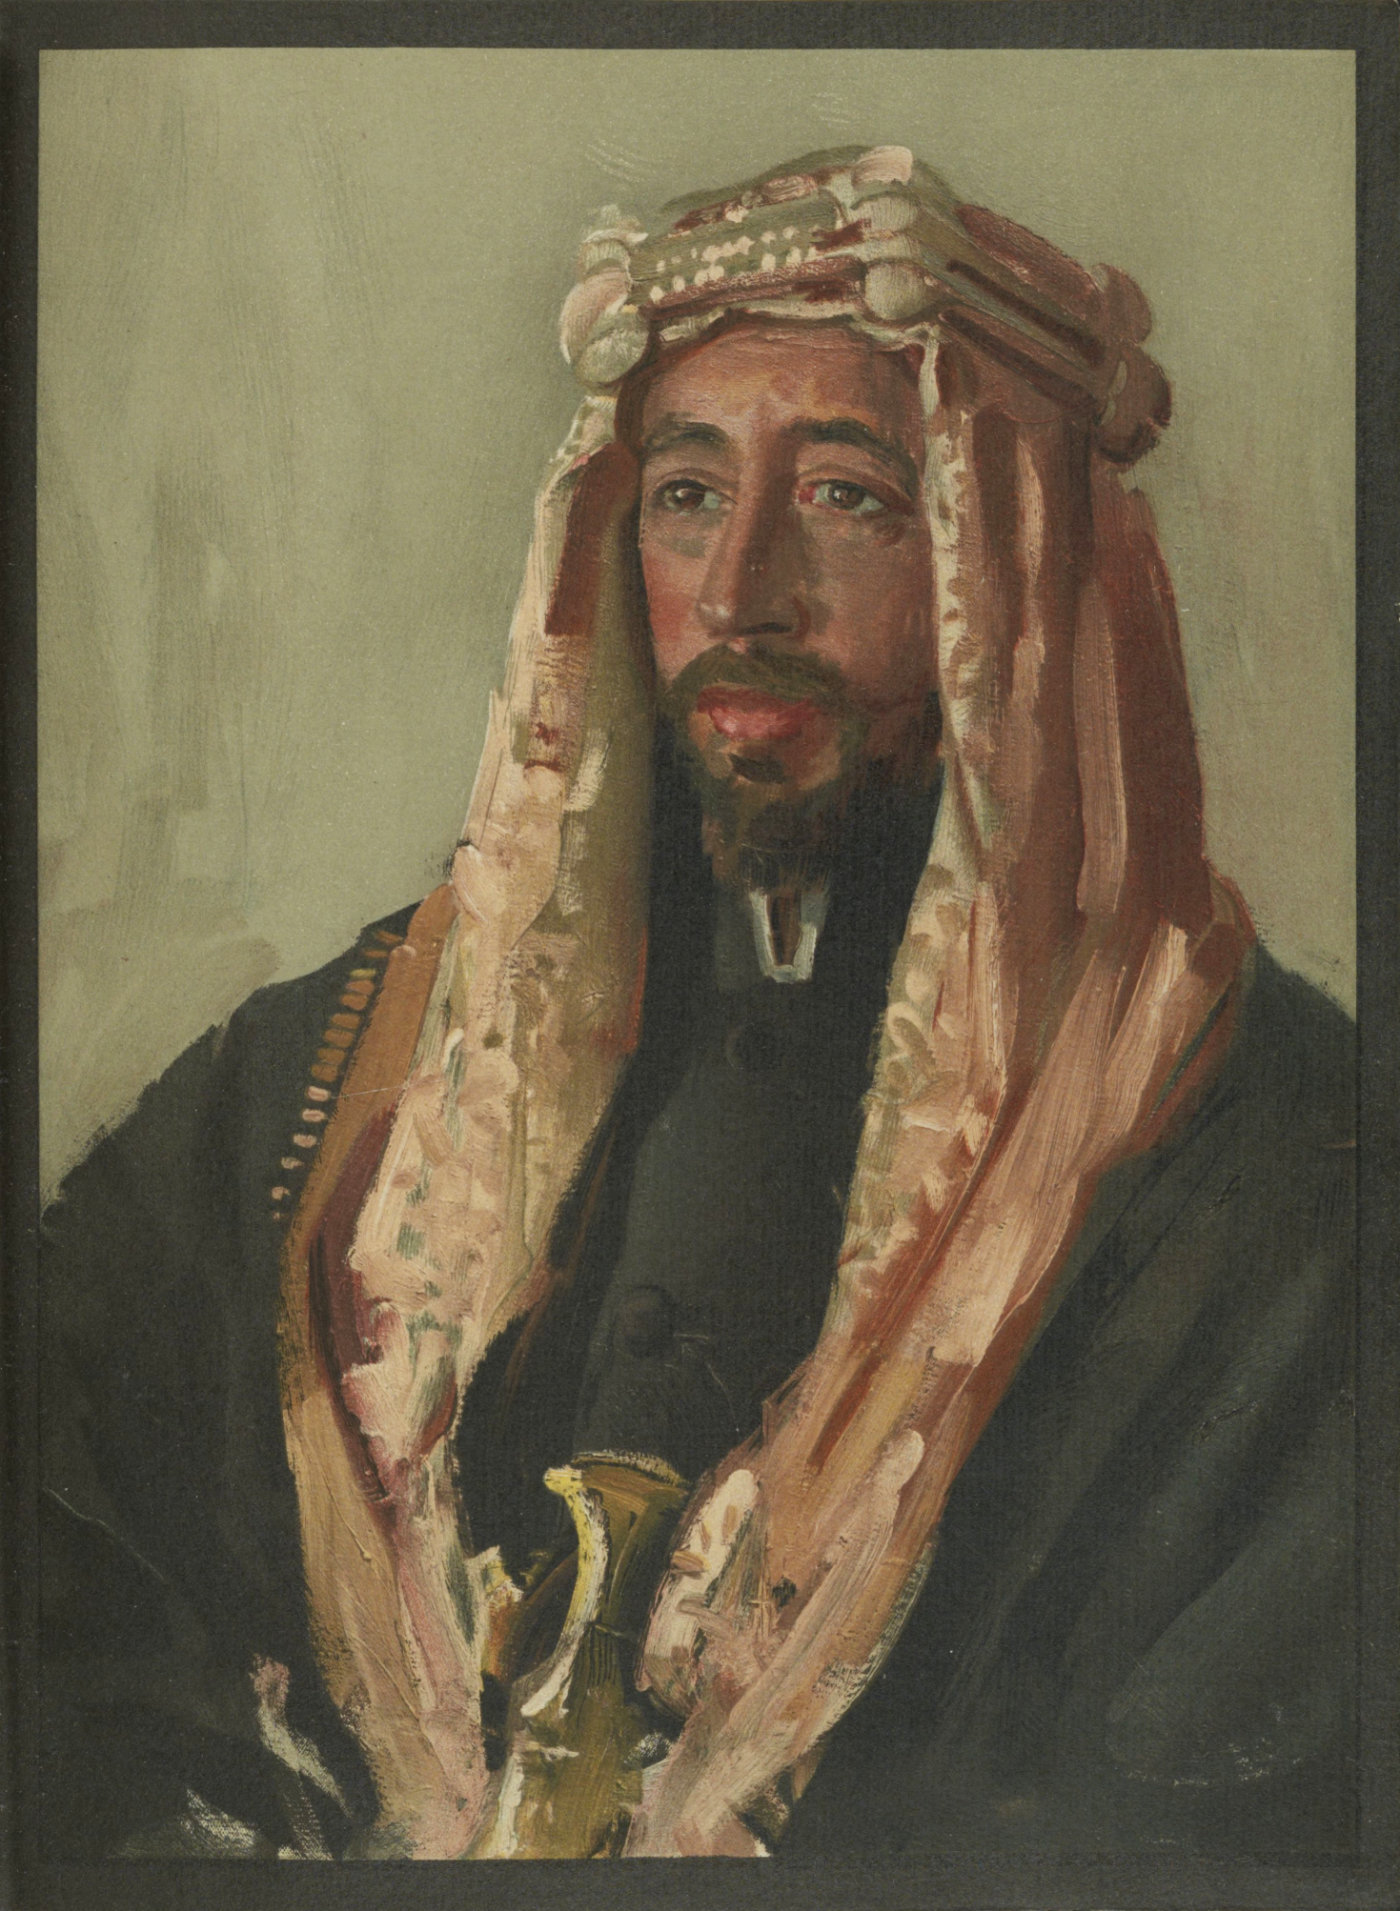 Pastel portrait of a bearded Arab man in dark robe and red kaffiyeh and agal, facing slightly to his right, holding a sword with only the hilt visible.